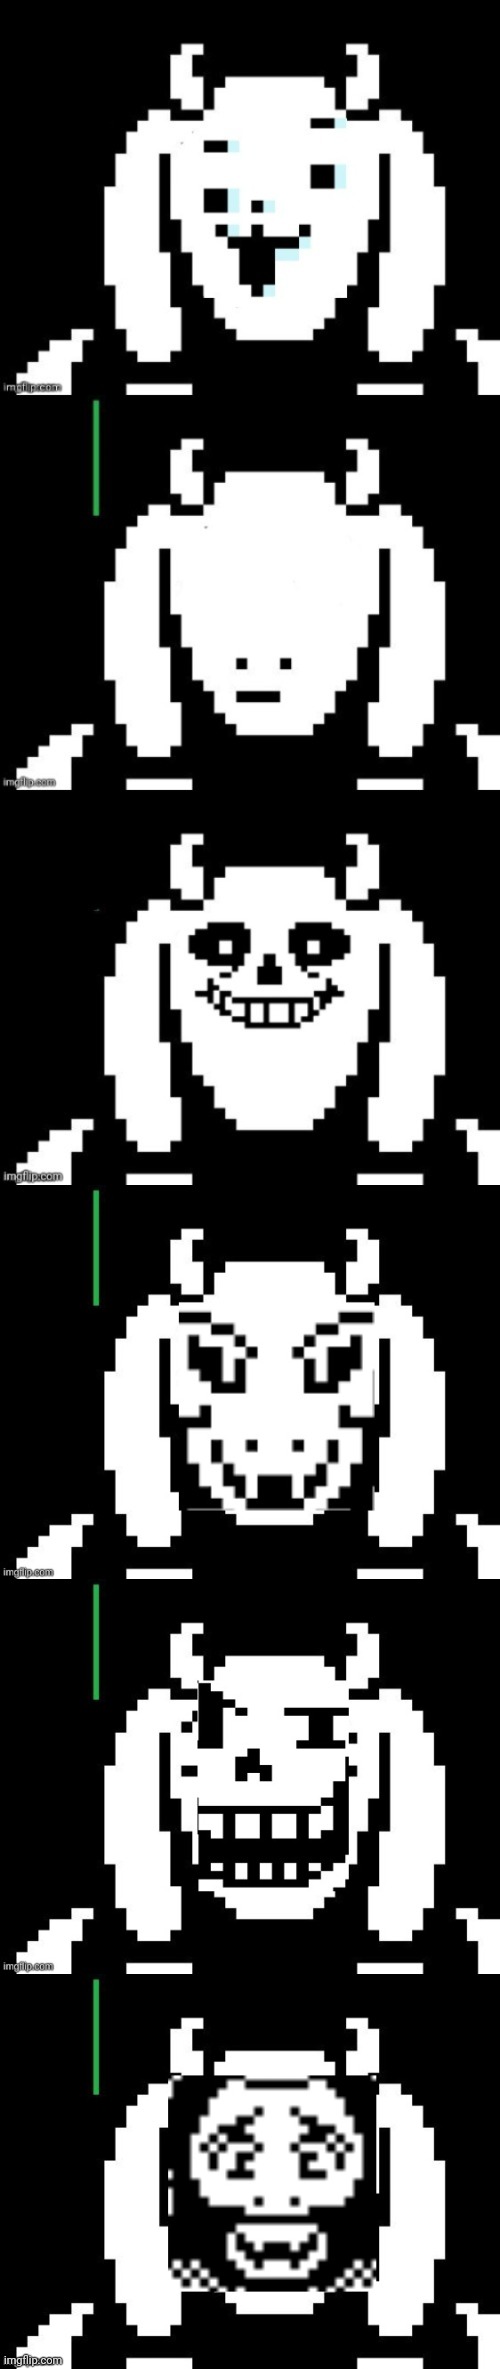 Even more cursed | image tagged in undertale,cursed | made w/ Imgflip meme maker